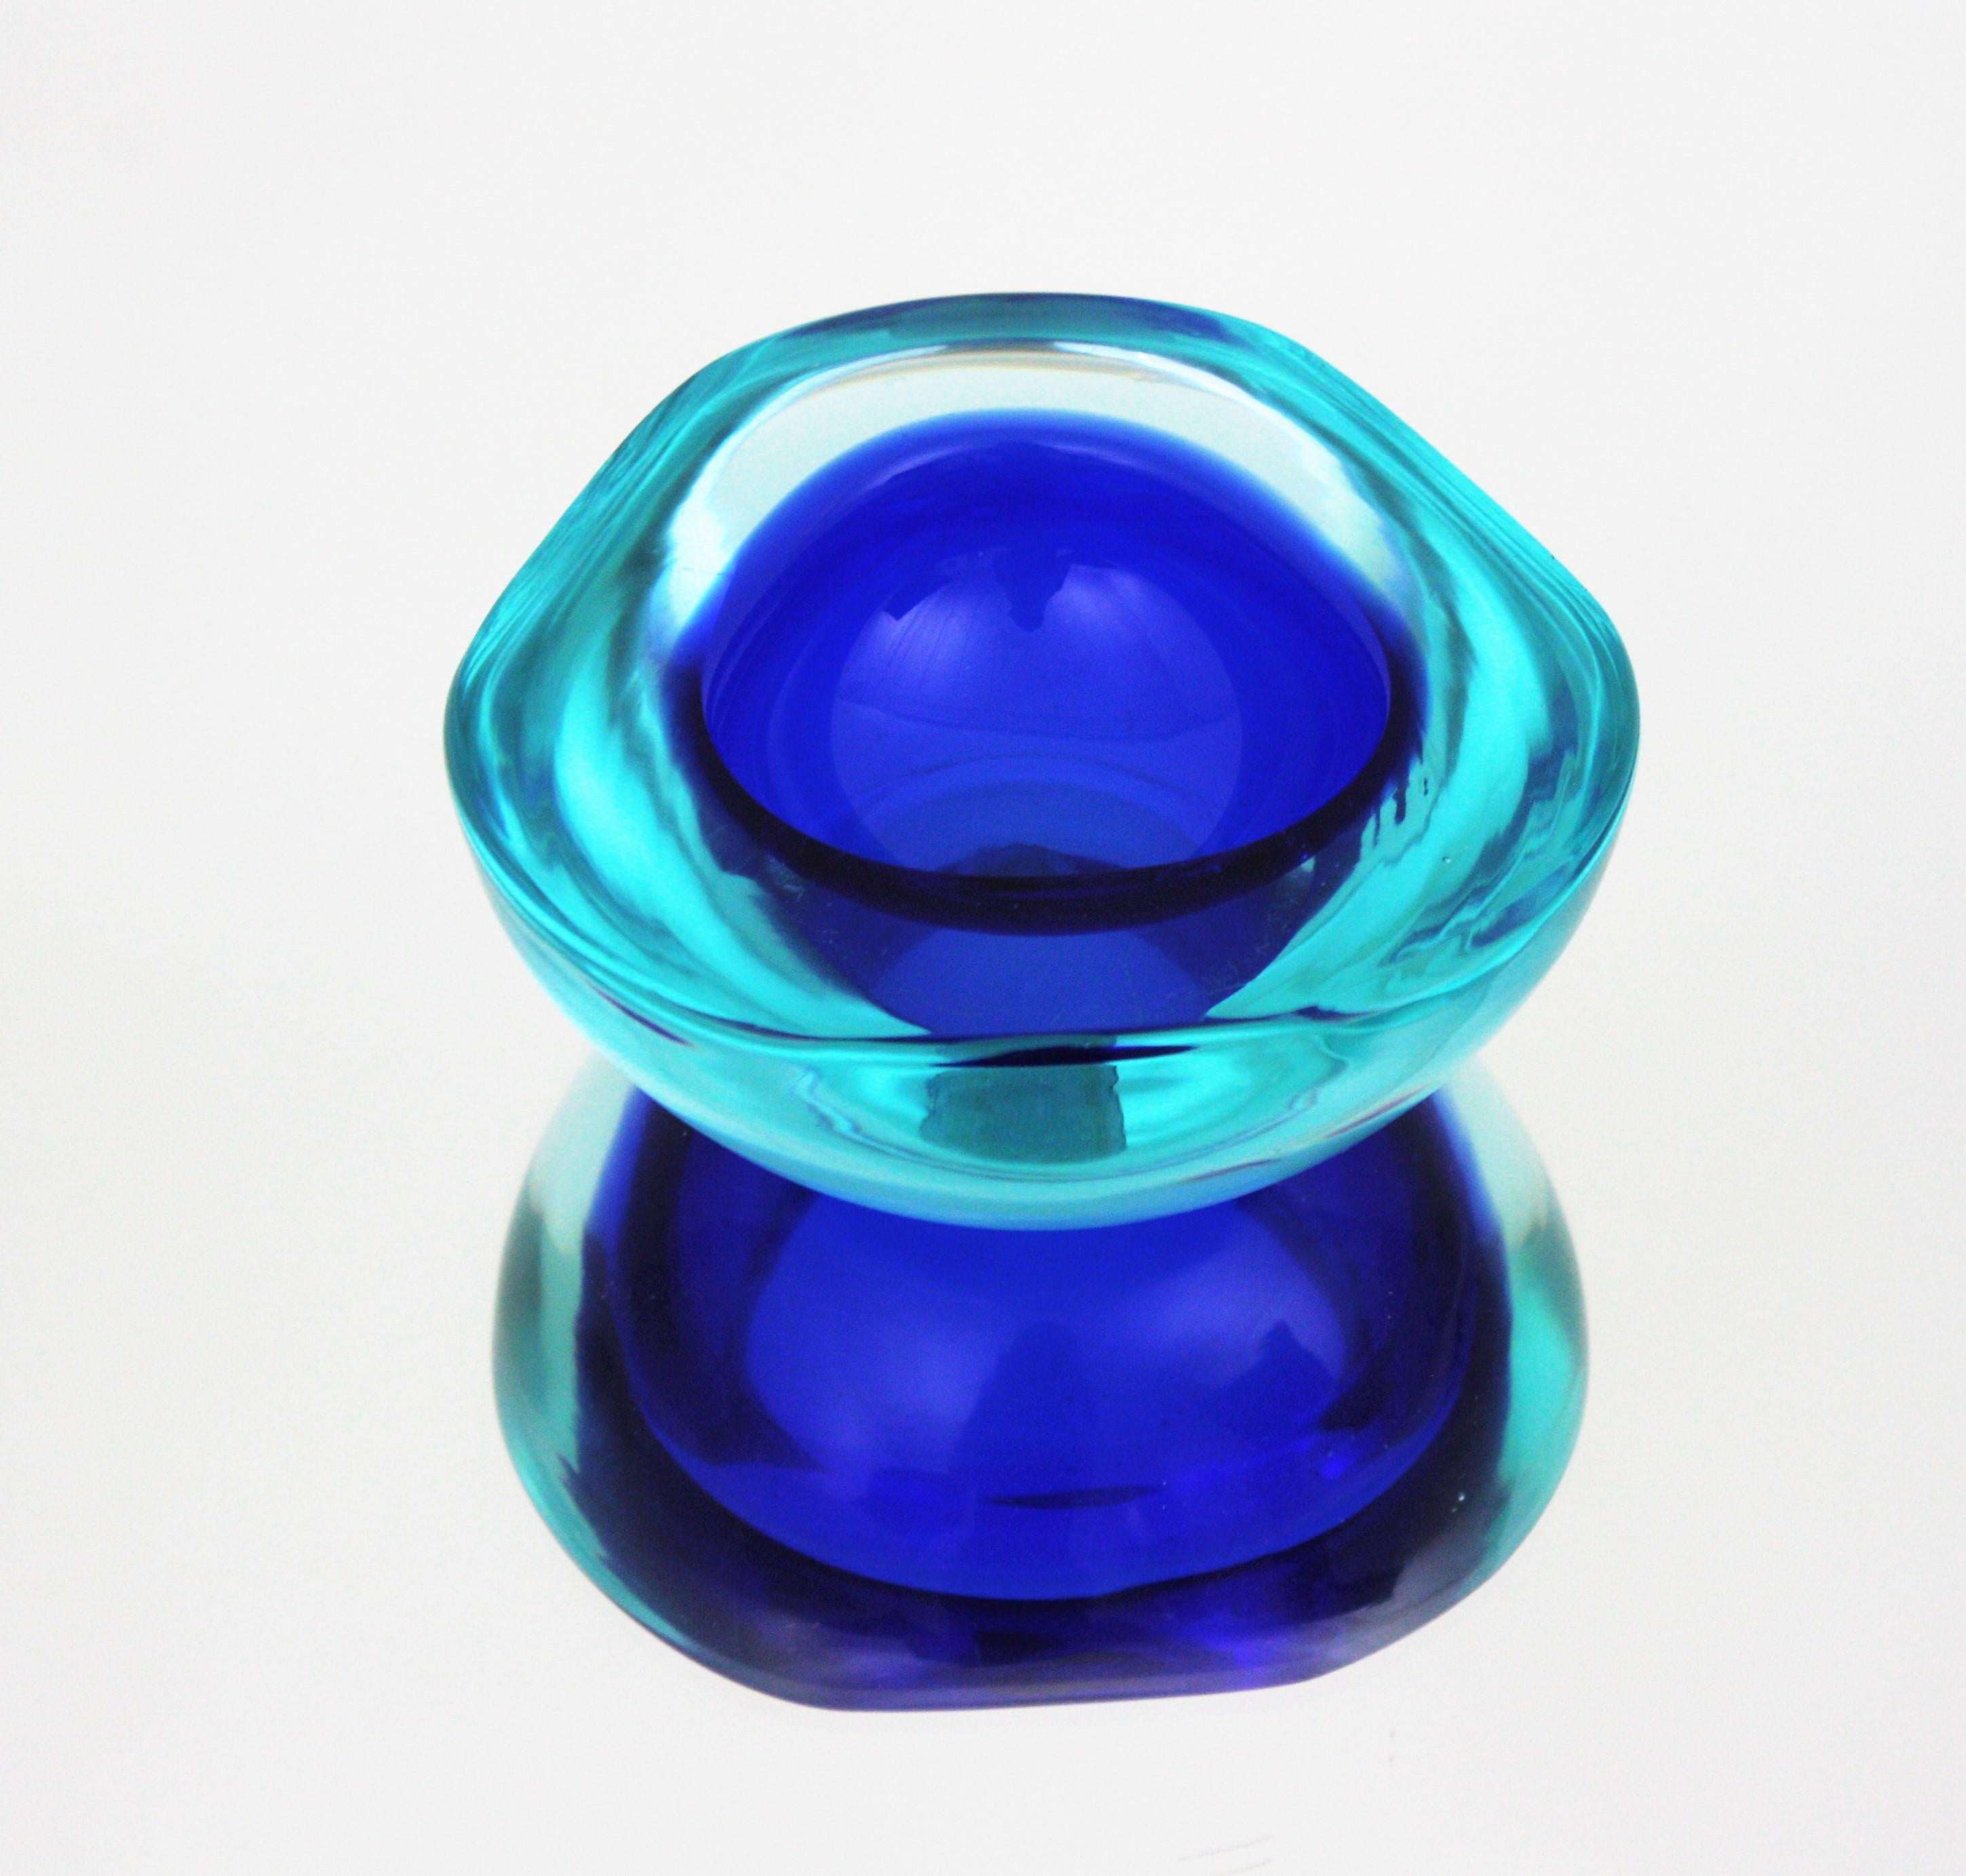 Archimede Seguso Murano Sommerso Blue Clear Glass Geode Bowl, Italy, 1960s For Sale 10